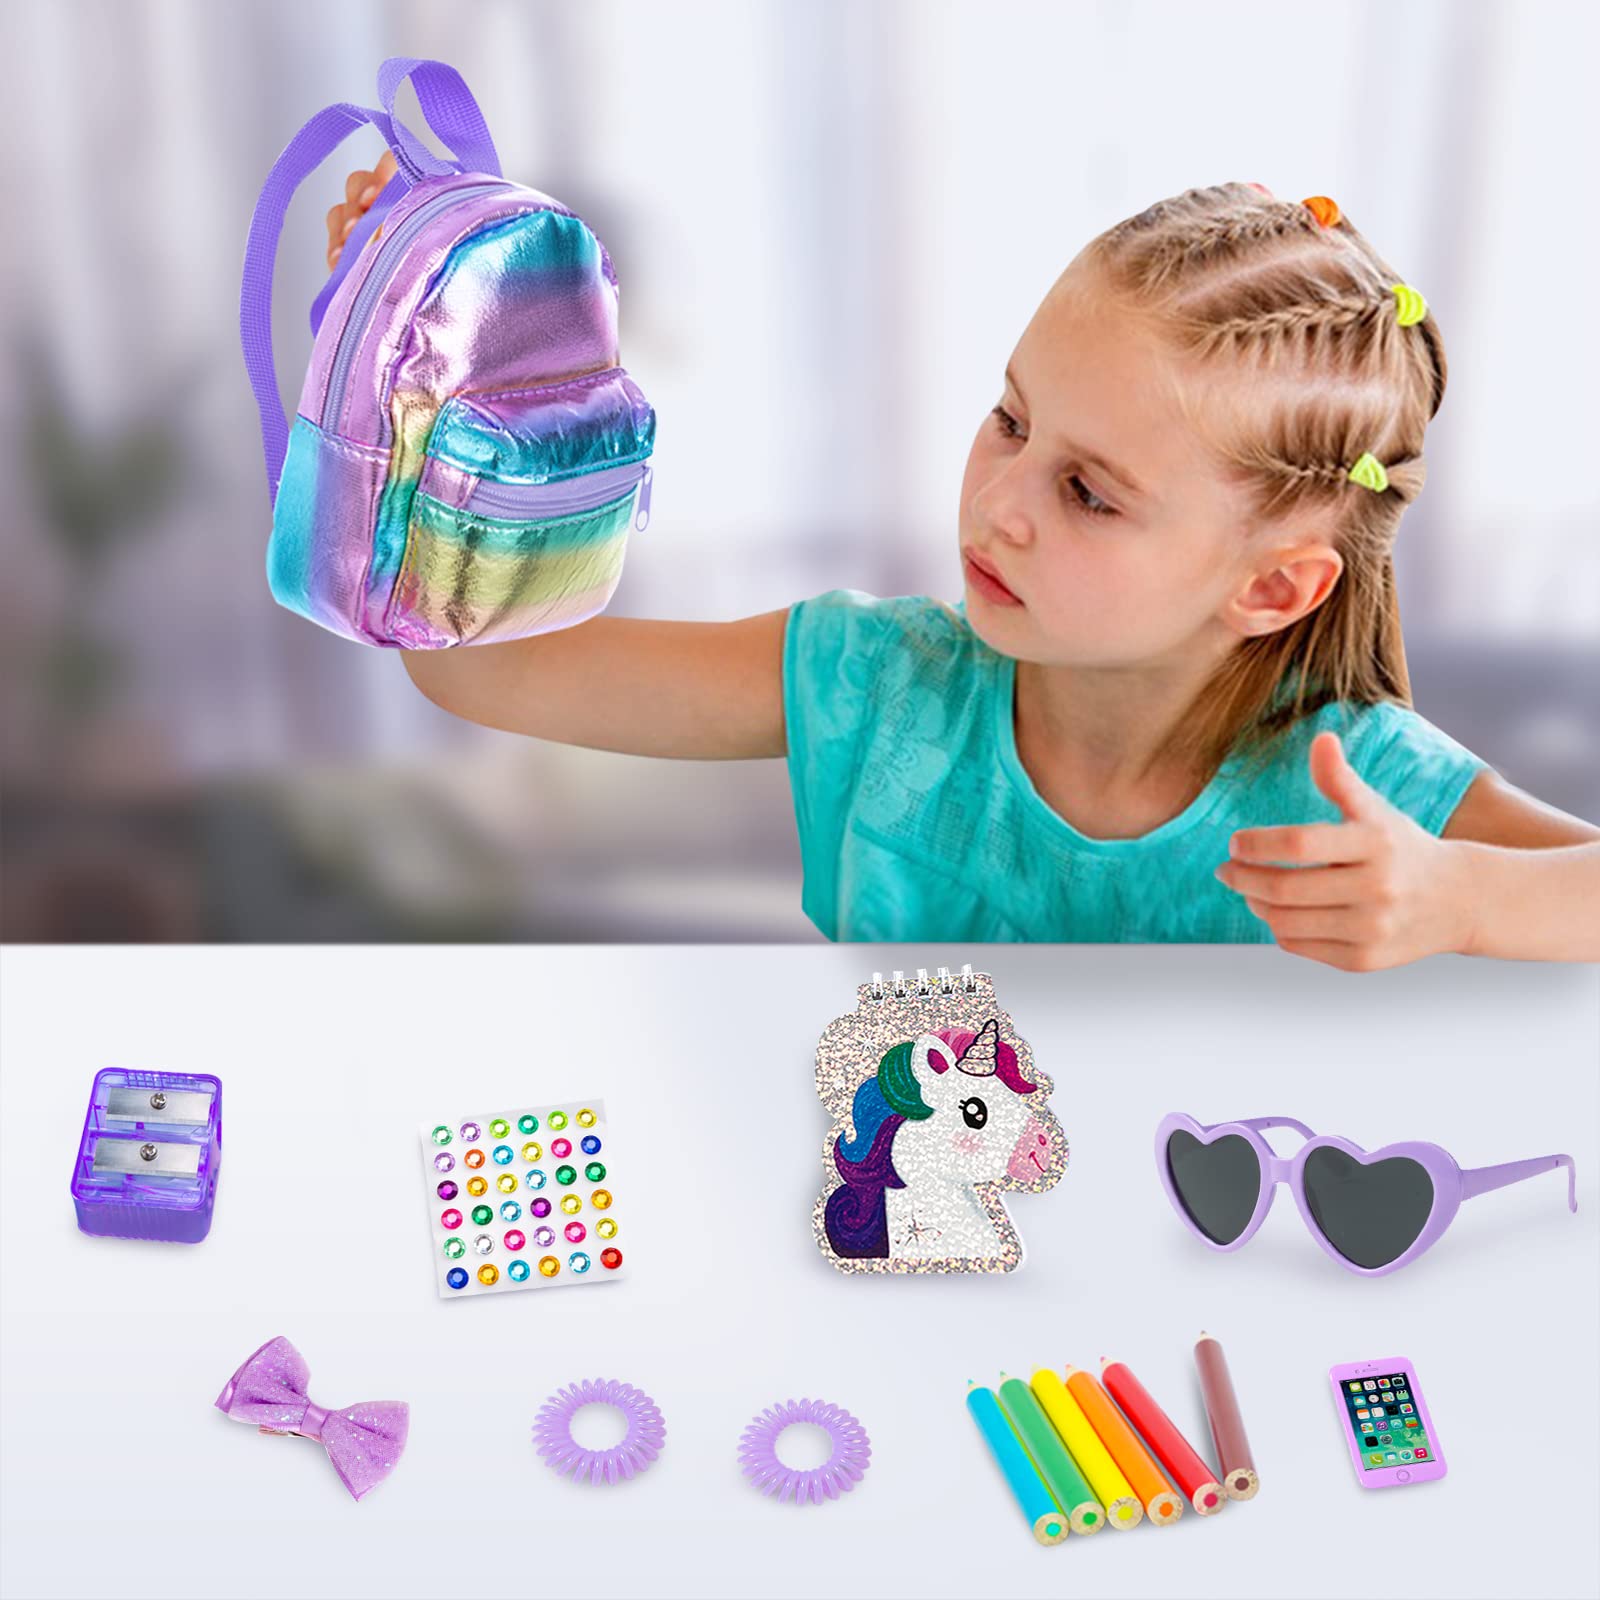 18 Inch Girl Doll Clothes and Accessories School Supplies Playset with Doll Clothes,School Bags, Sunglasses, Pencils, Pencil Sharpener, Notebooks, Phone, Hair Clip, Stickers （No Doll）